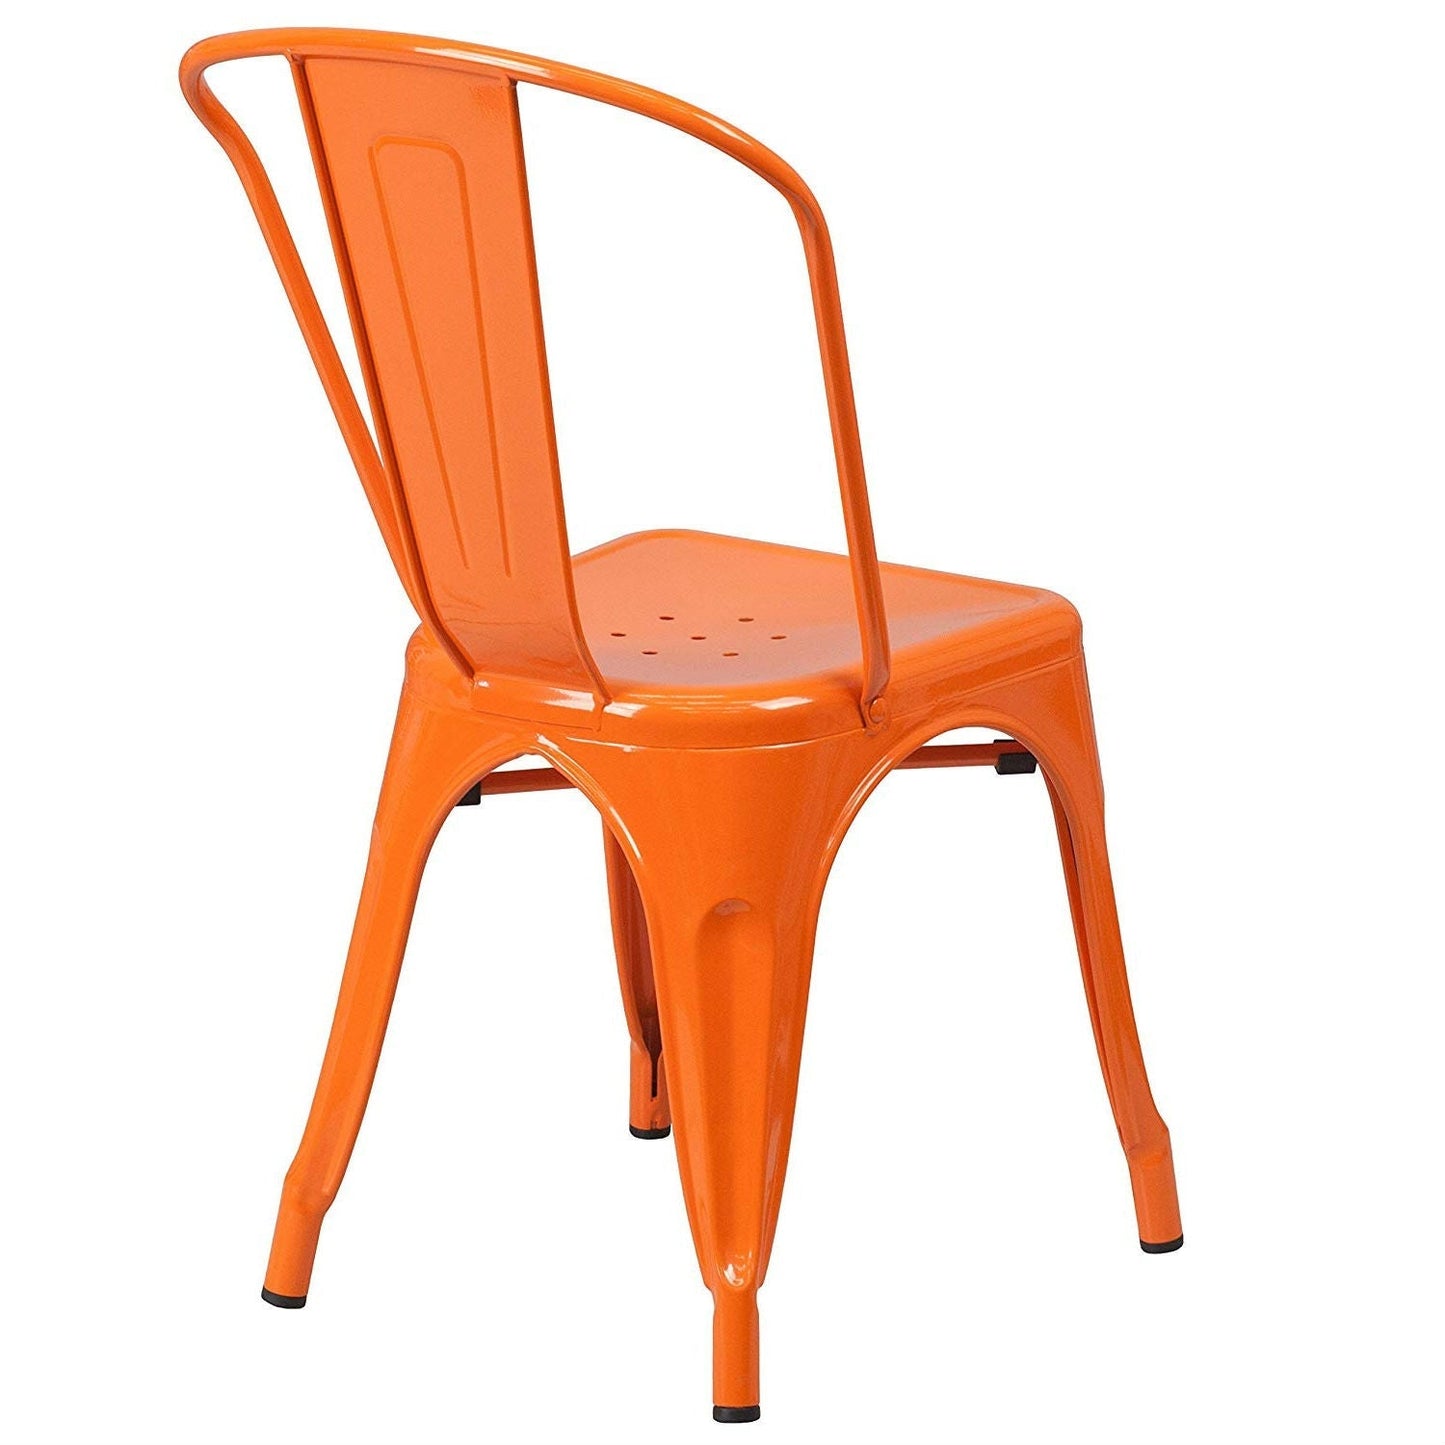 Dining > Dining Chairs - Set Of 4 Outdoor Indoor Orange Metal Stacking Bistro Dining Chairs